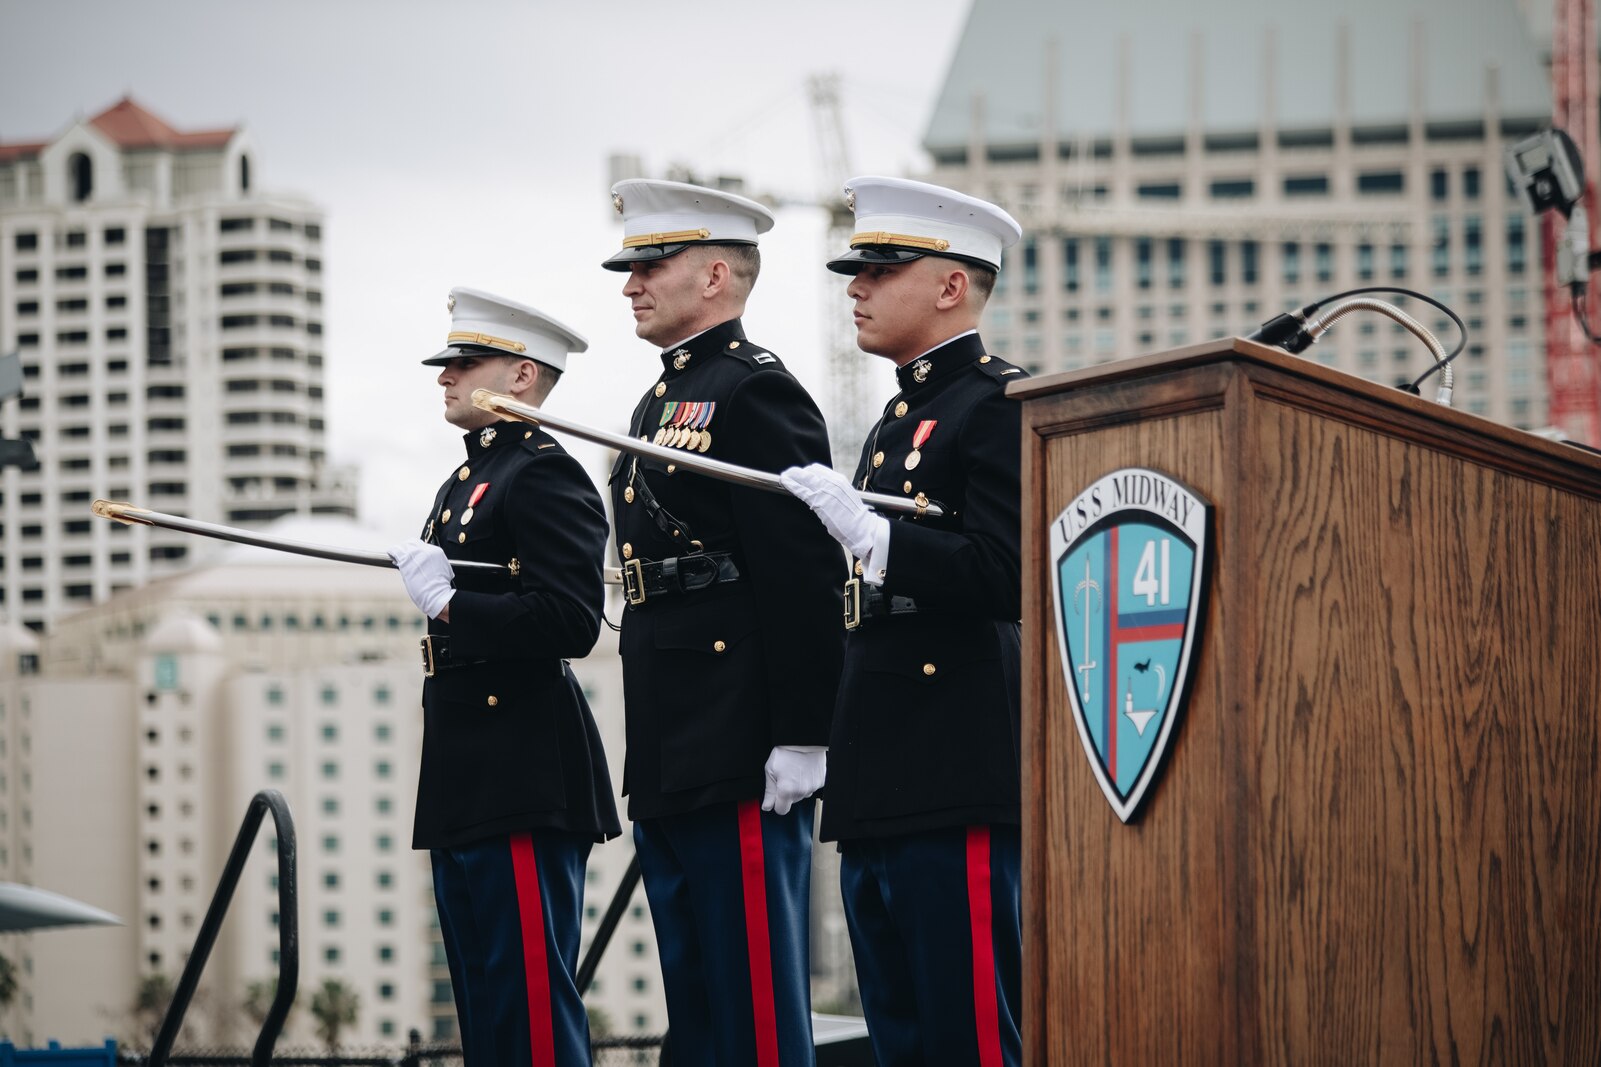 U.S. Marine Corps officers stand at attention on the flight deck of the USS Midway during a commissioning ceremony in San Diego, California, Jan. 29, 2022. A commissioning ceremony is the culminating event of an officer’s career, signifying the transformation from candidate to officer. (U.S. Marine Corps photo by Sgt. Alina Thackray)